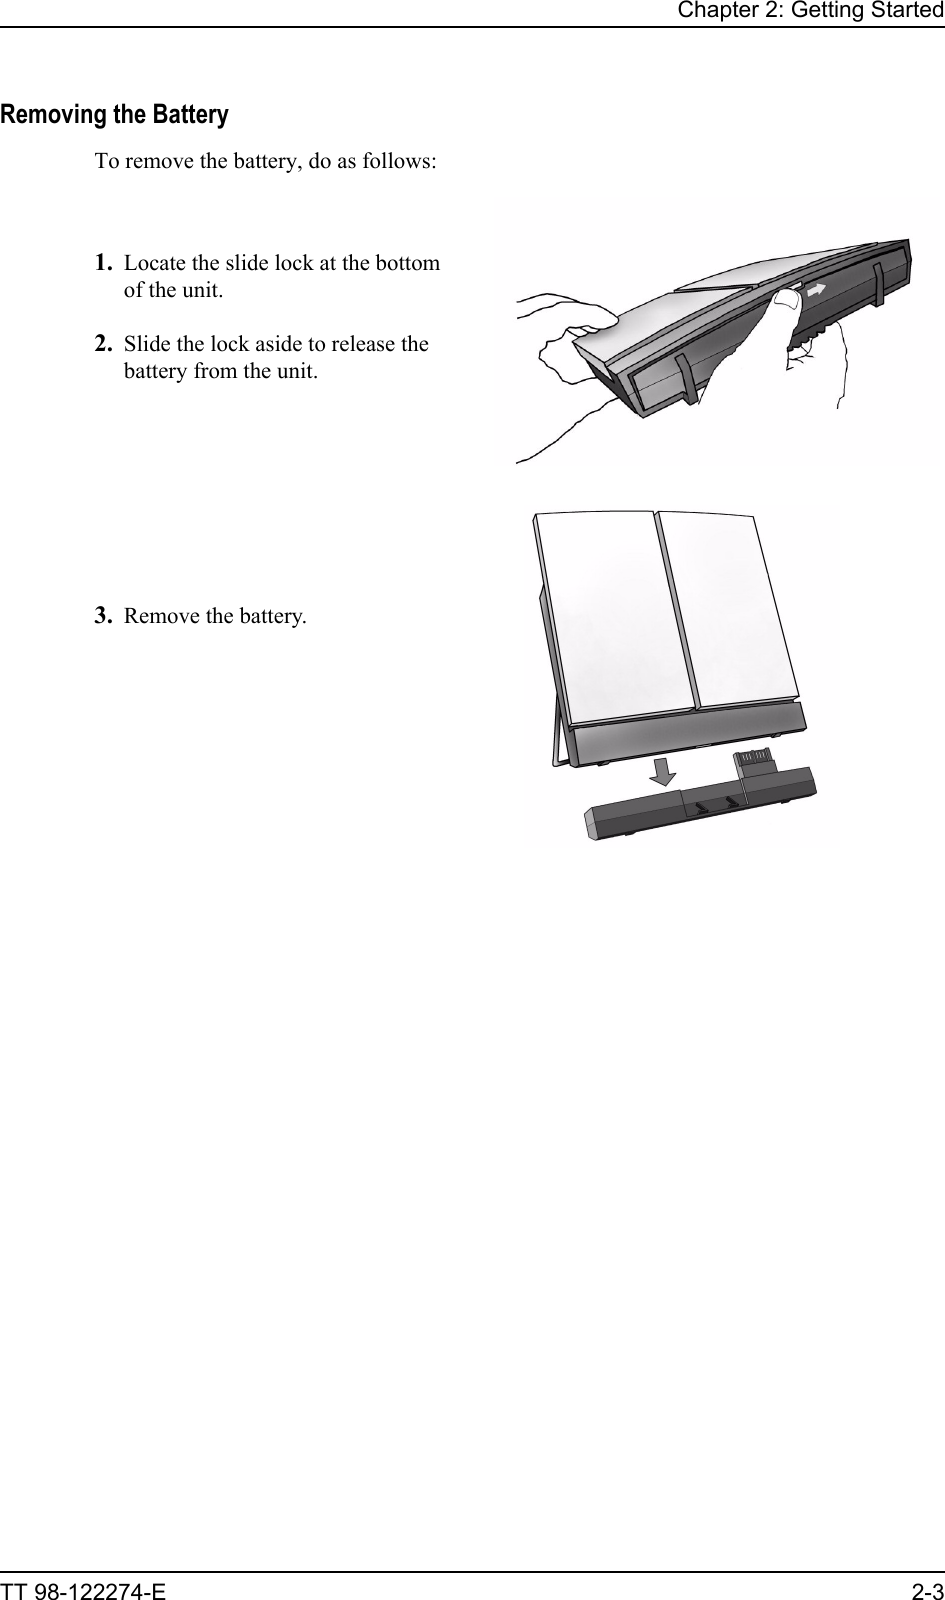 Chapter 2: Getting StartedTT 98-122274-E 2-3Removing the BatteryTo remove the battery, do as follows:1. Locate the slide lock at the bottom of the unit.2. Slide the lock aside to release the battery from the unit.3. Remove the battery.